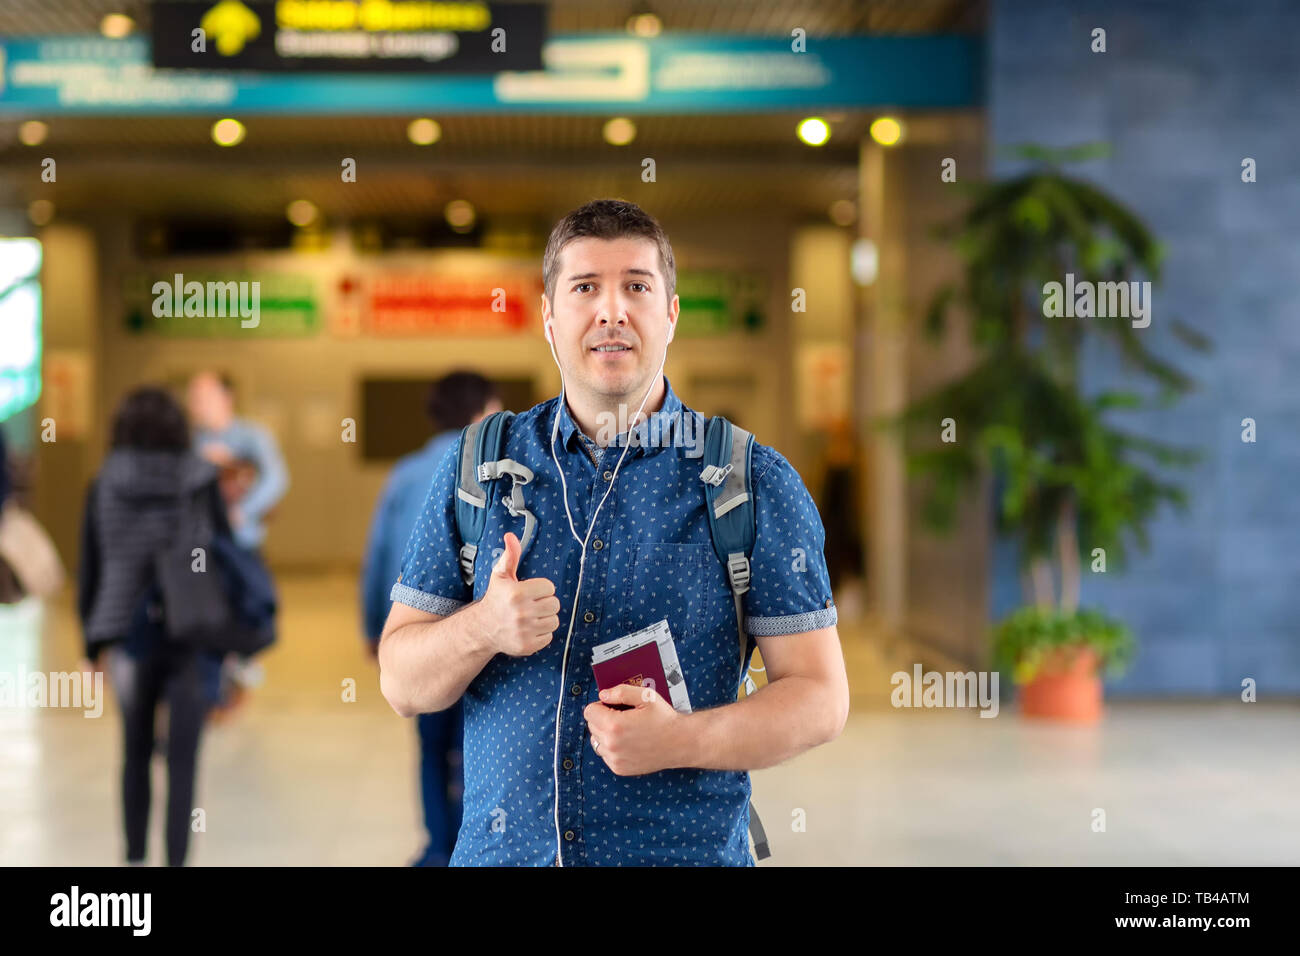 Smiling tourist at airport departure terminal holding passport and boarding pass Stock Photo